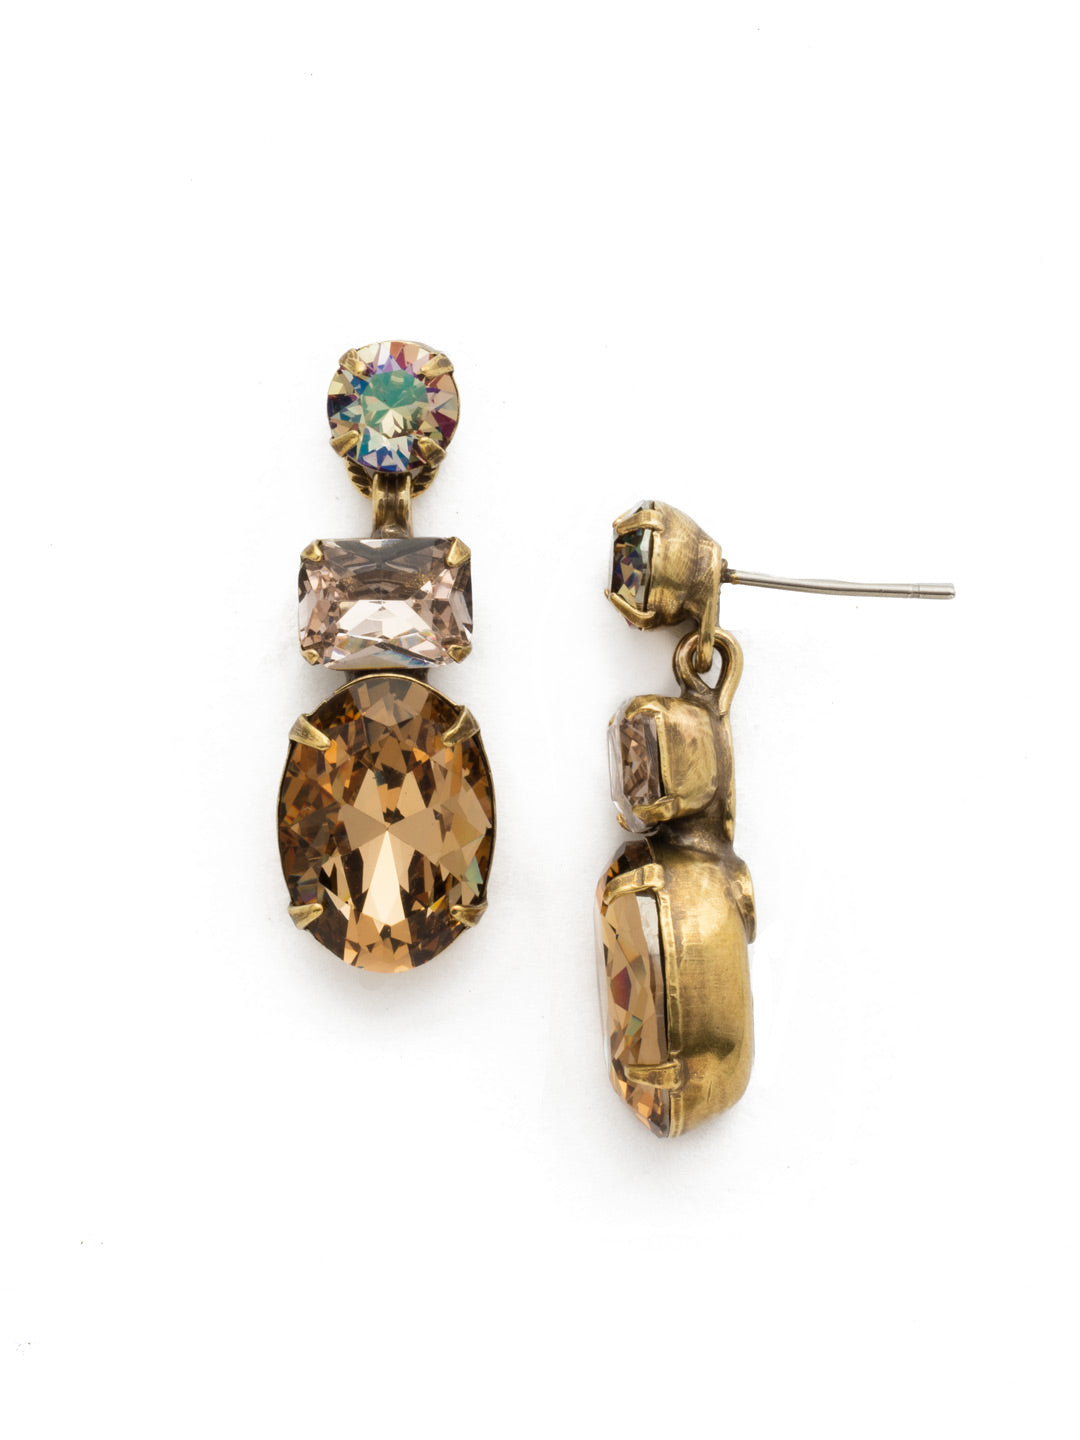 Forget-Me-Not Dangle Earring - EDQ6AGSTN - A central oval stone is highlighted by emerald and round cut crystals in this classic design. From Sorrelli's Sandstone collection in our Antique Gold-tone finish.